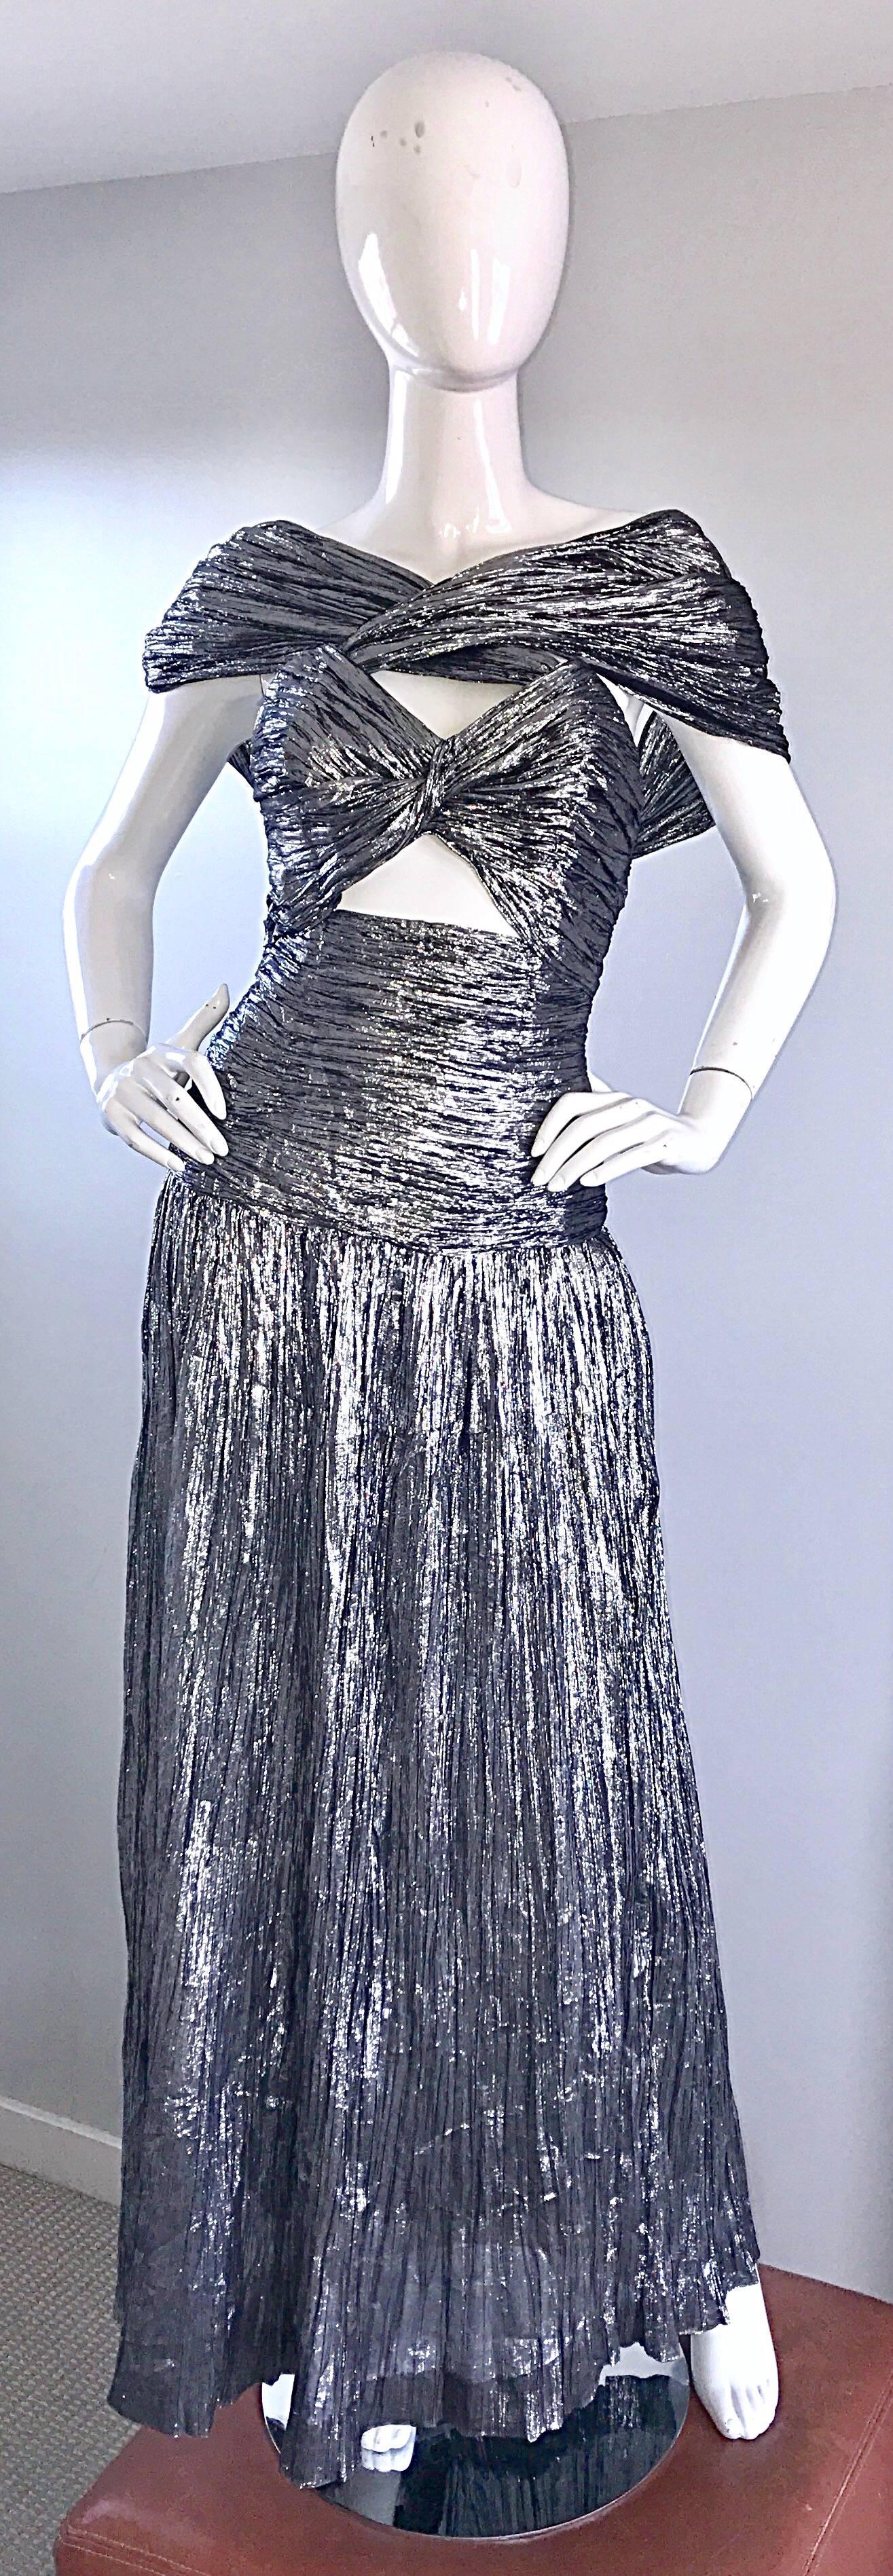 Simply sensational 70s TED LAPIDUS HAUTE COUTURE metallic silver silk plisse Avant Garde cut-out evening dress! Features attached straps that can be worn across the bust to form a shawl like appearance. Cut-out below the bust reveals just the right